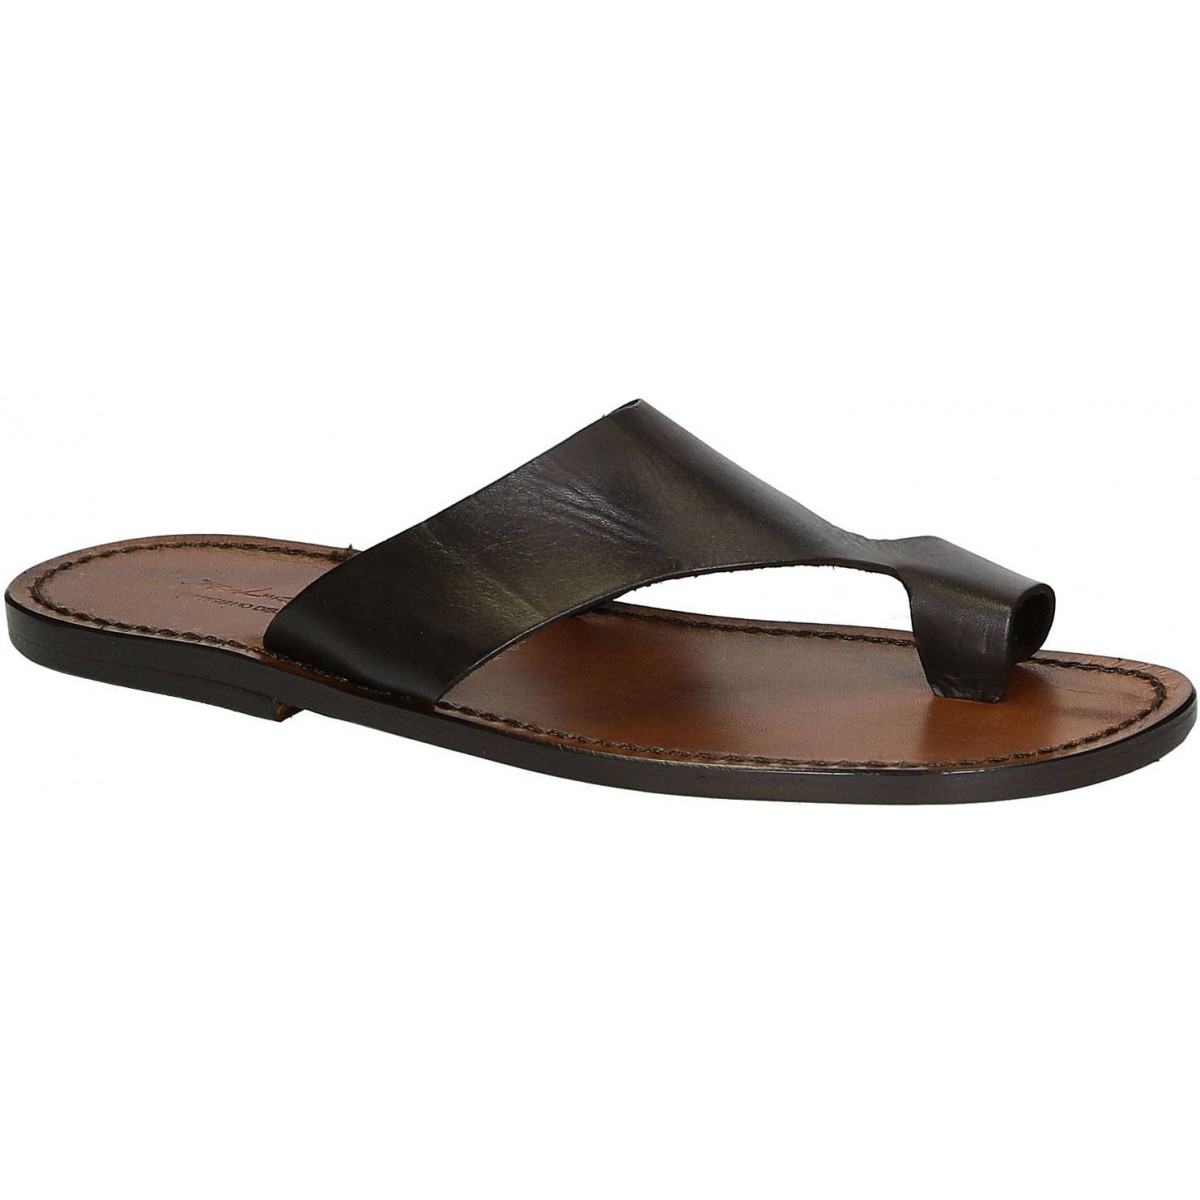 Brown leather thong sandals for men Handmade in Italy | The leather ...